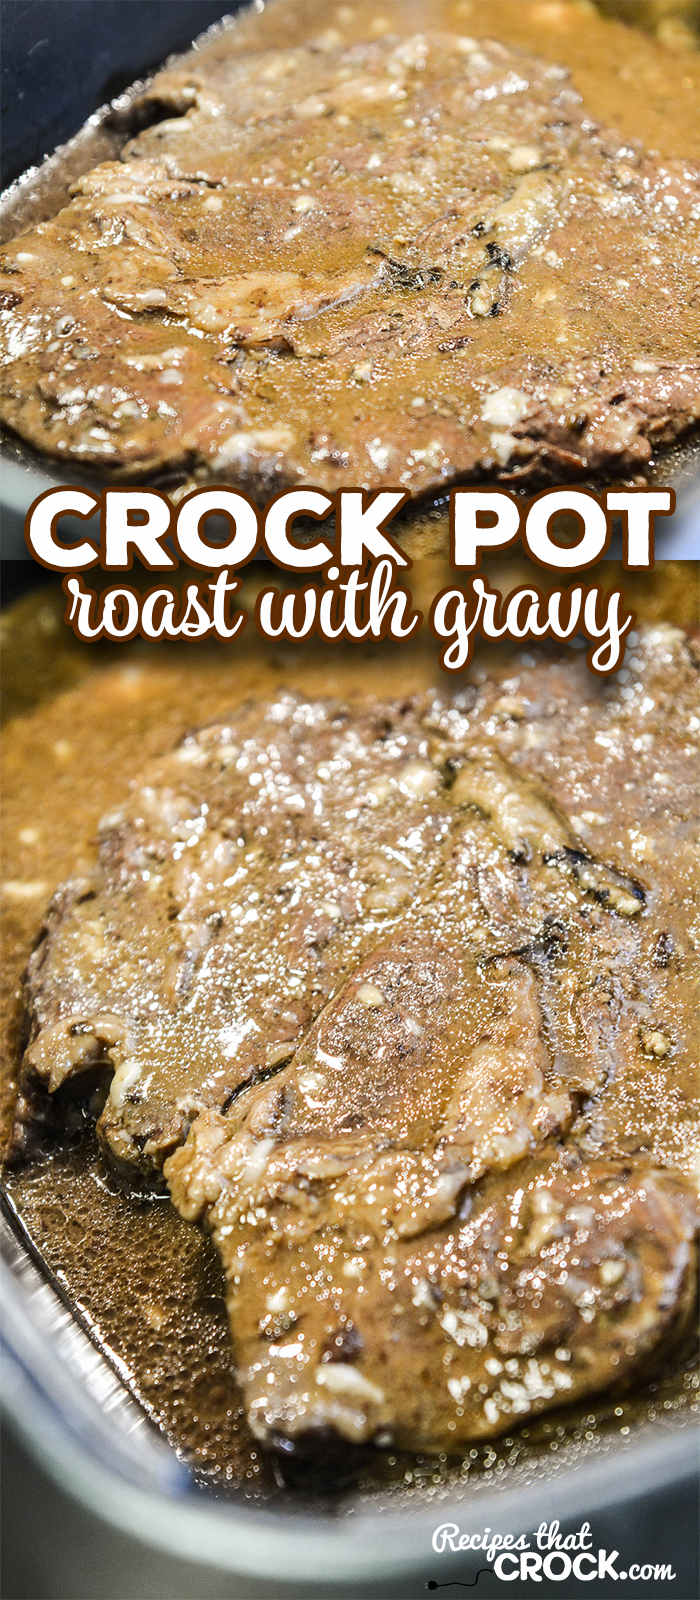 Are you looking for a foolproof way to make pot roast? Our Crock Pot Roast with Gravy is a super simple way to make an amazing roast in your slow cooker every time!